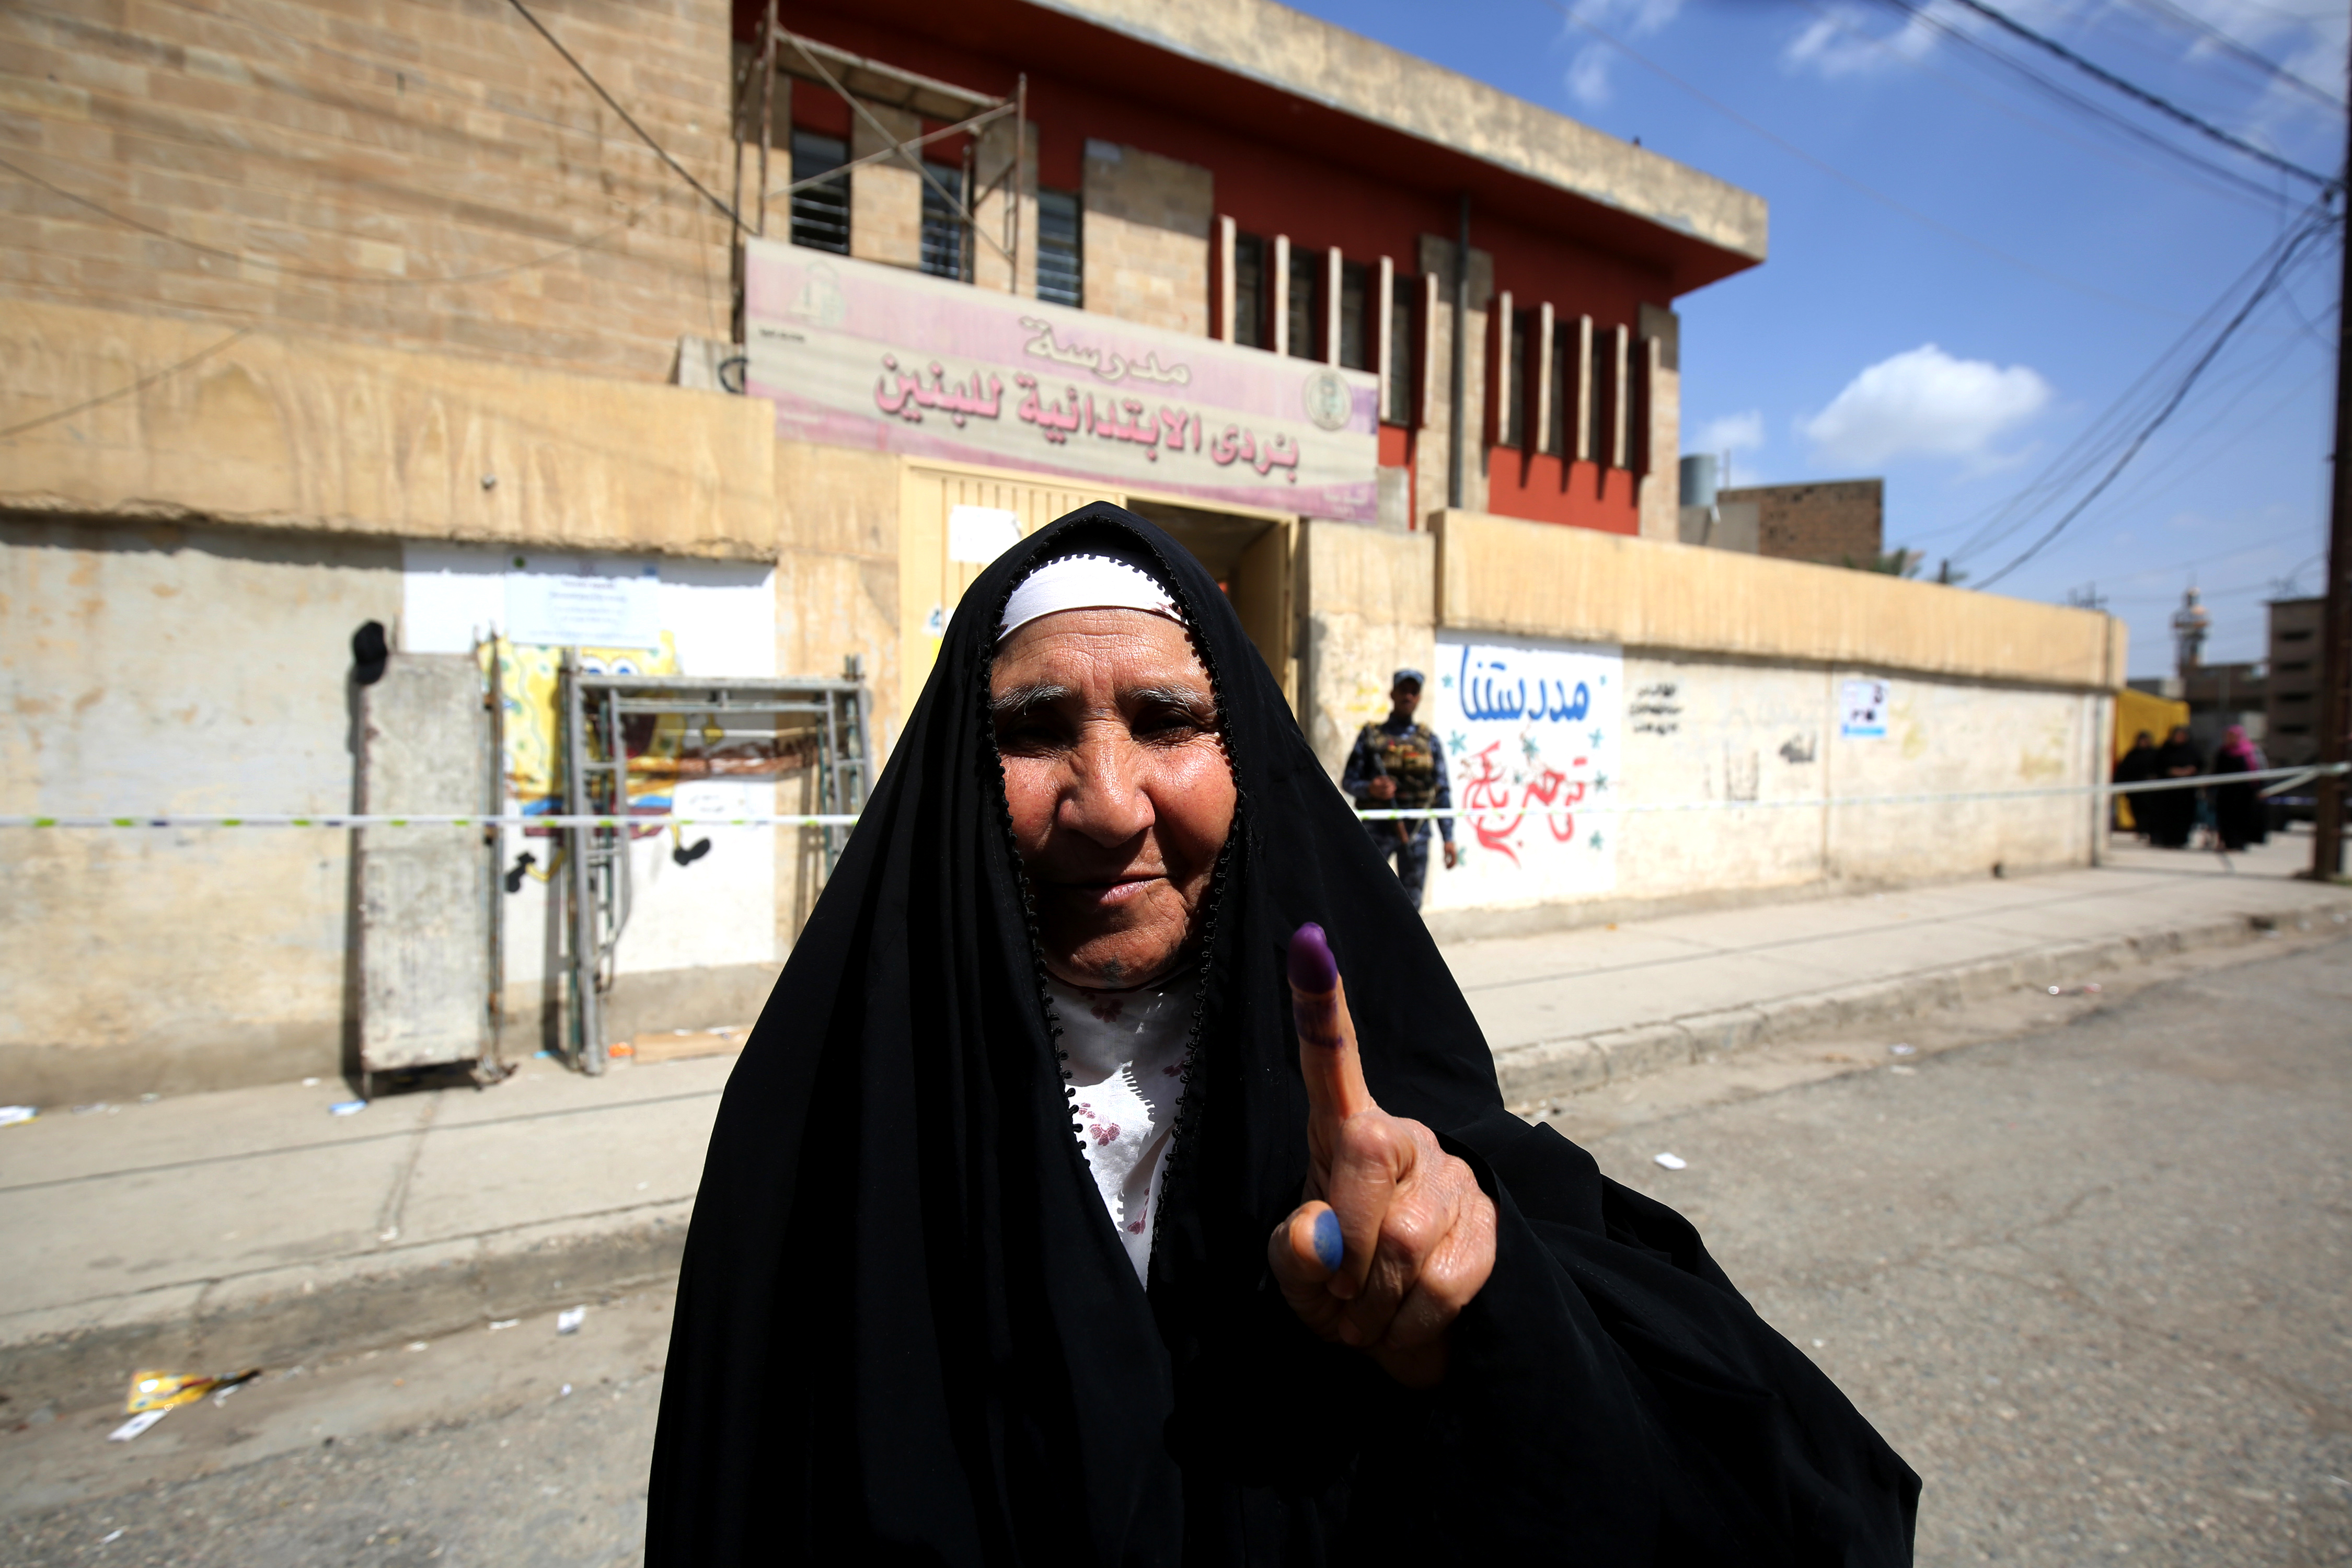 A voter in Mosul.